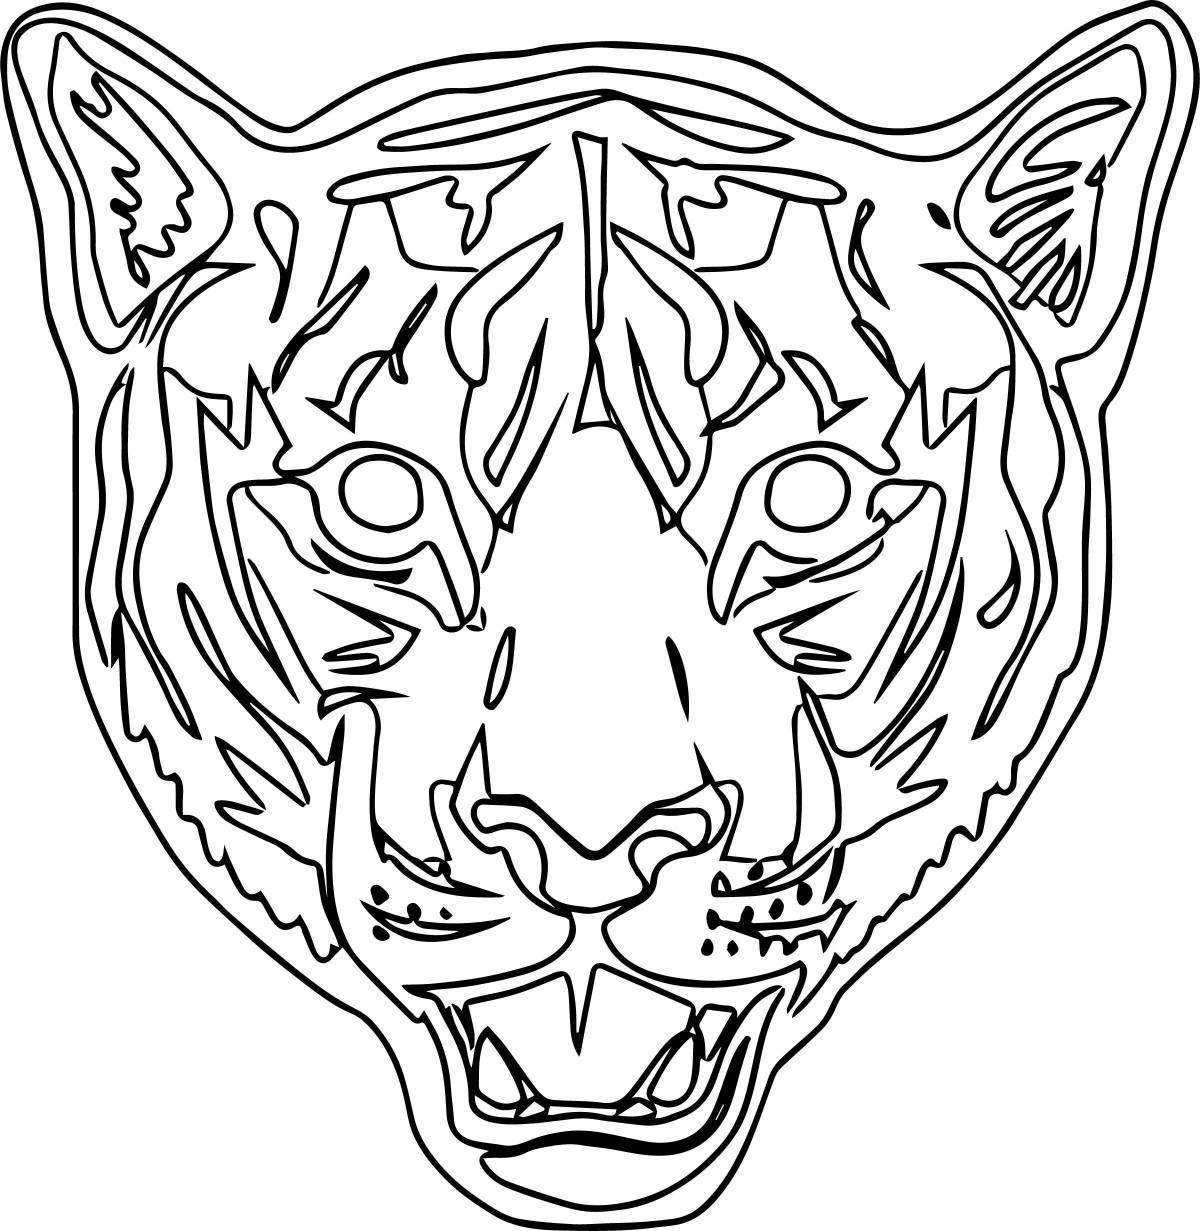 Exquisite tiger mask coloring book